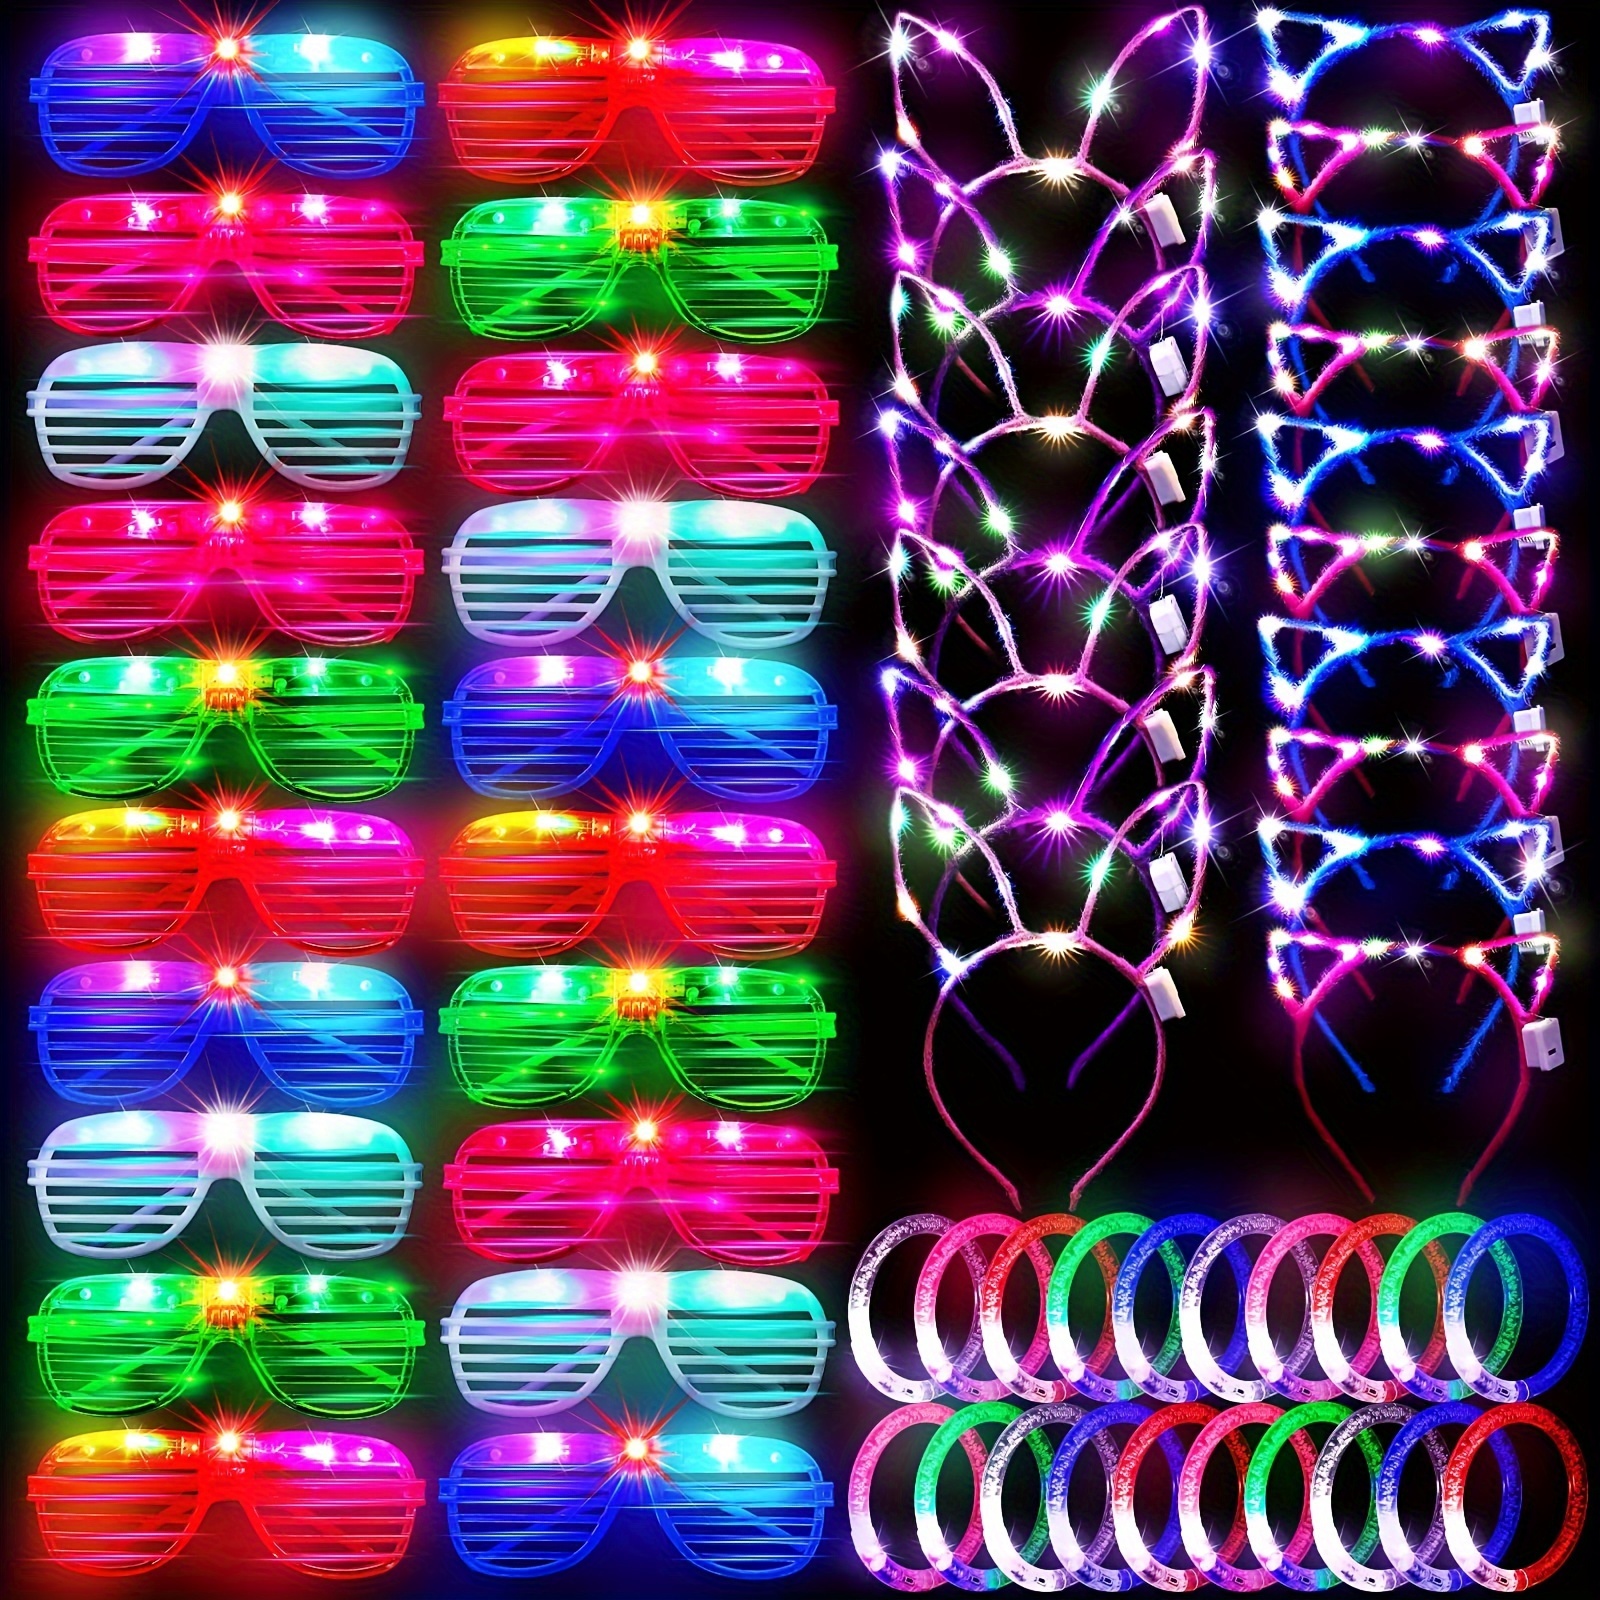 

60 Pieces Glow In The Dark Party Supplies Led Light Up Toy Party Favors Includes 20 Led Shutter Glasses, 20 Glow Headbands, 20 Led Glow Bracelets, Neon Party Favors For Glow Party, Birthday